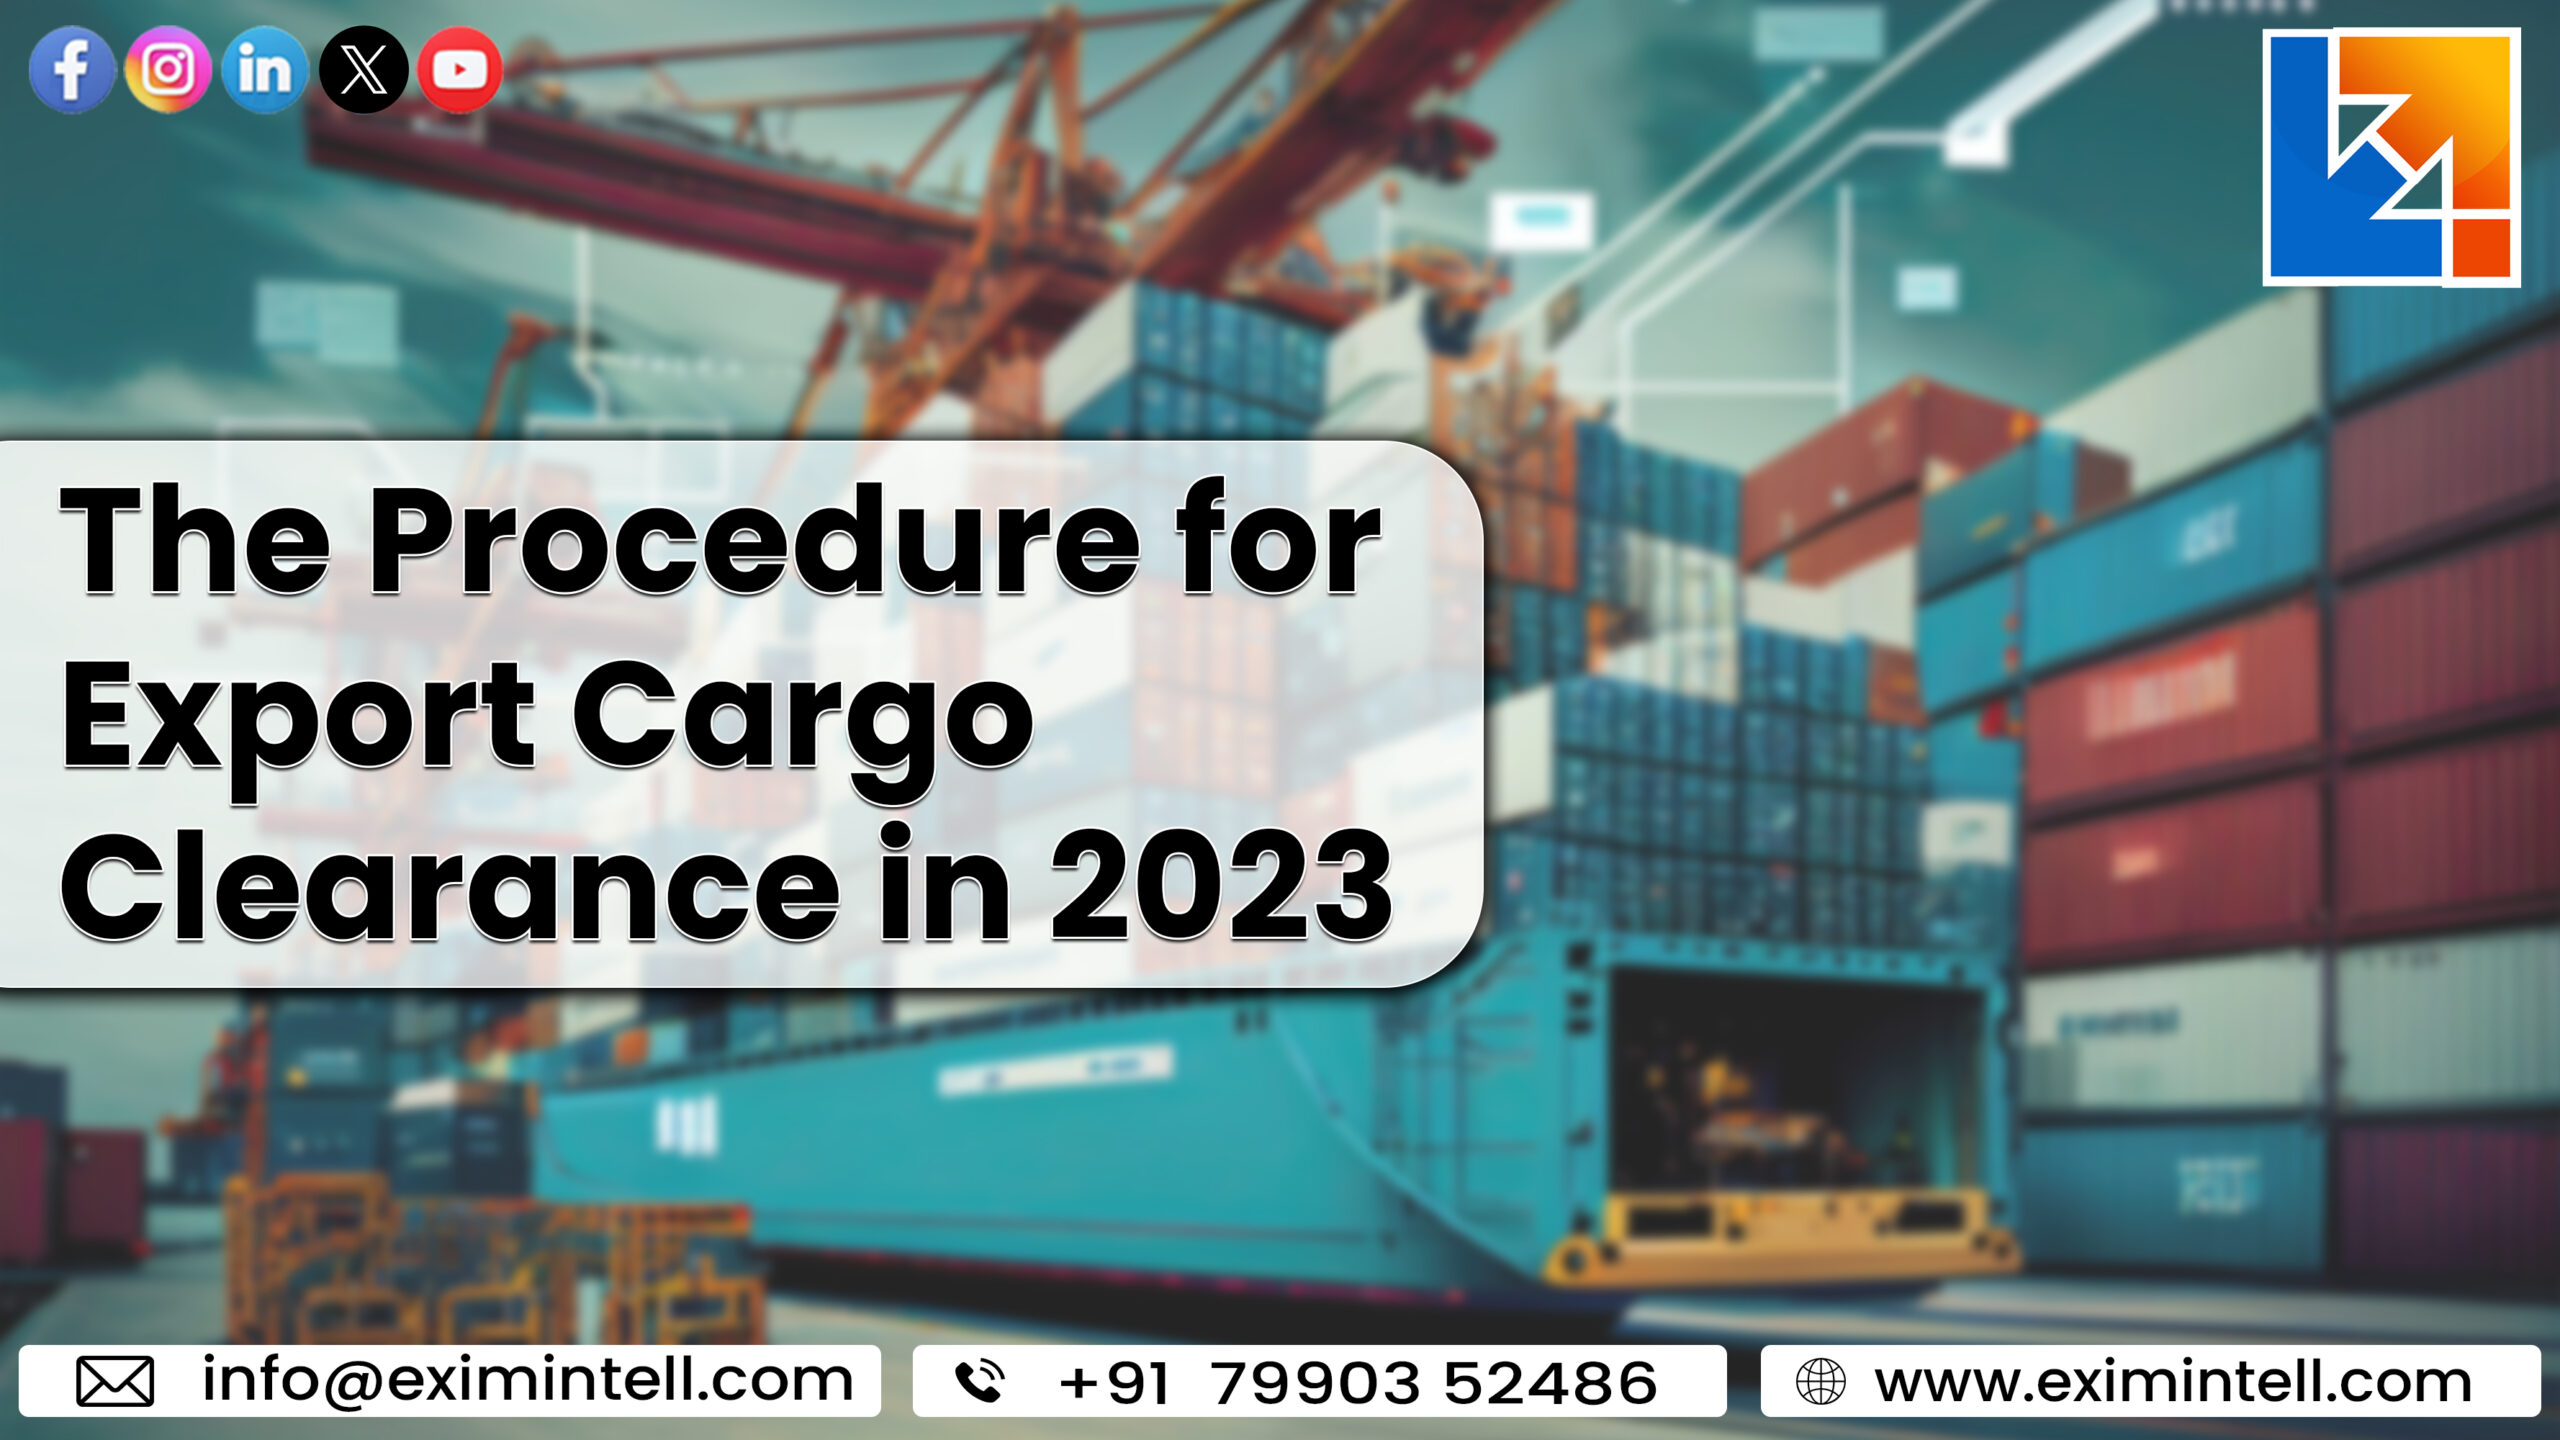 The Procedure for Export Cargo Clearance in 2023